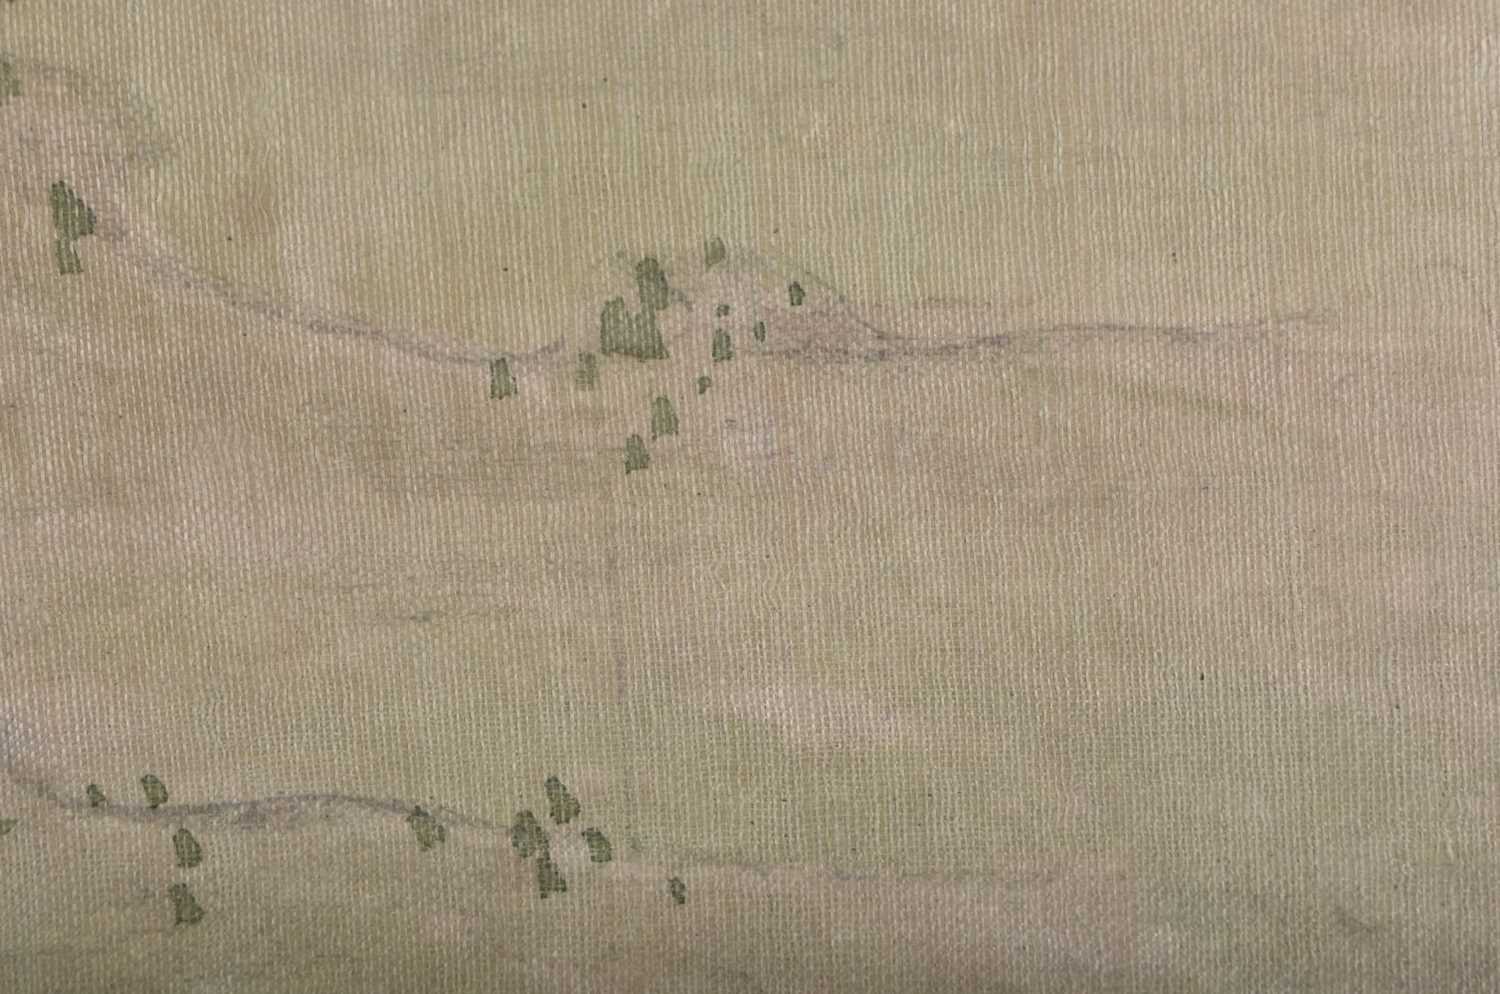 Attributed to Qian Hui'an (1833-1911) 3 x Watercolours, Figures within landscapes. 60 cm x 42 cm. - Image 13 of 38